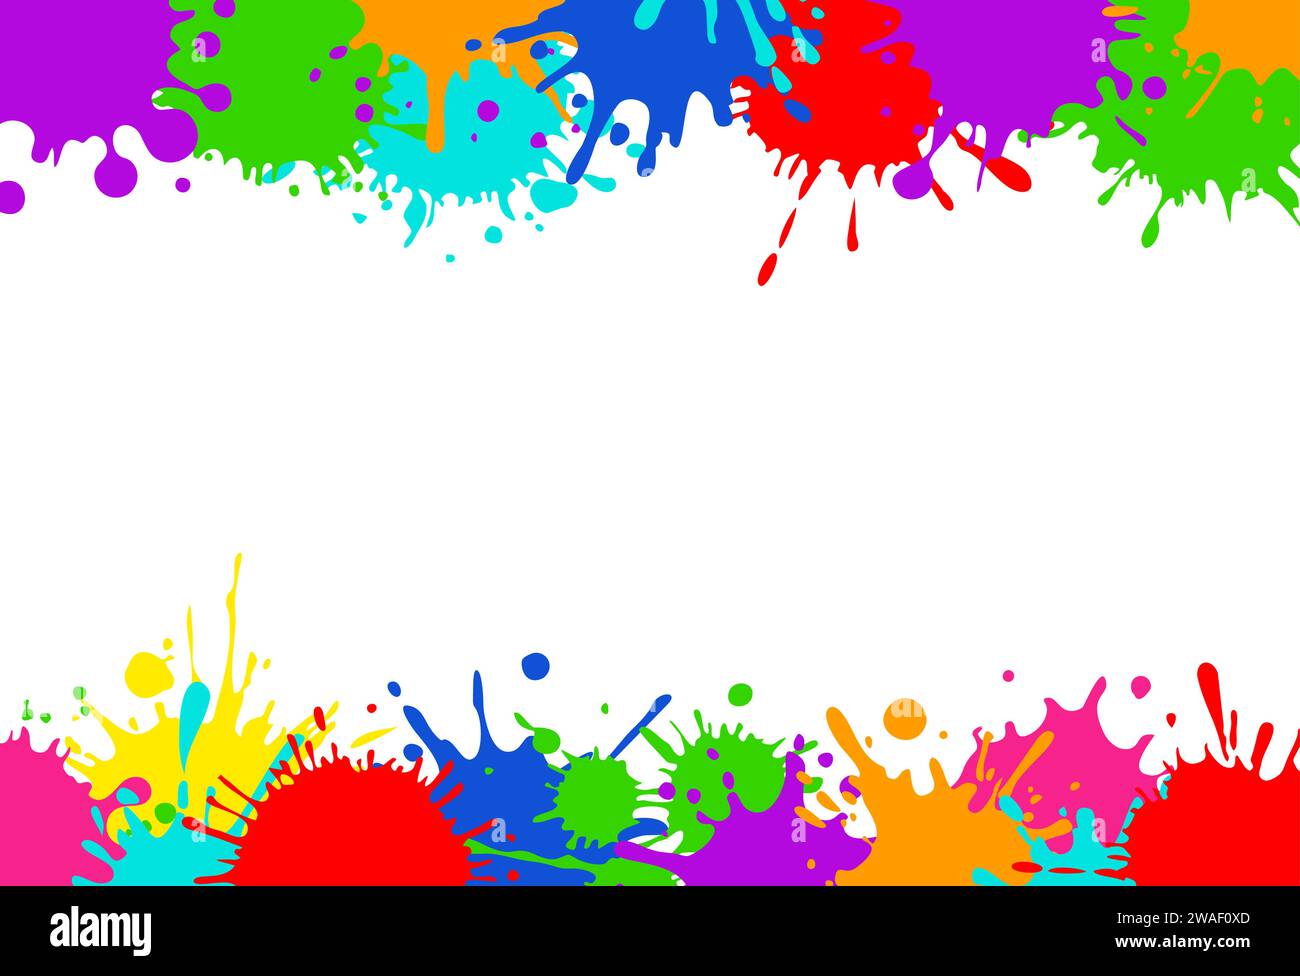 Bright colorful banner. Horizontal banner with colorful paint spots and splashes. Colorful blots, multicolored splash spray paints. Frame background Stock Vector